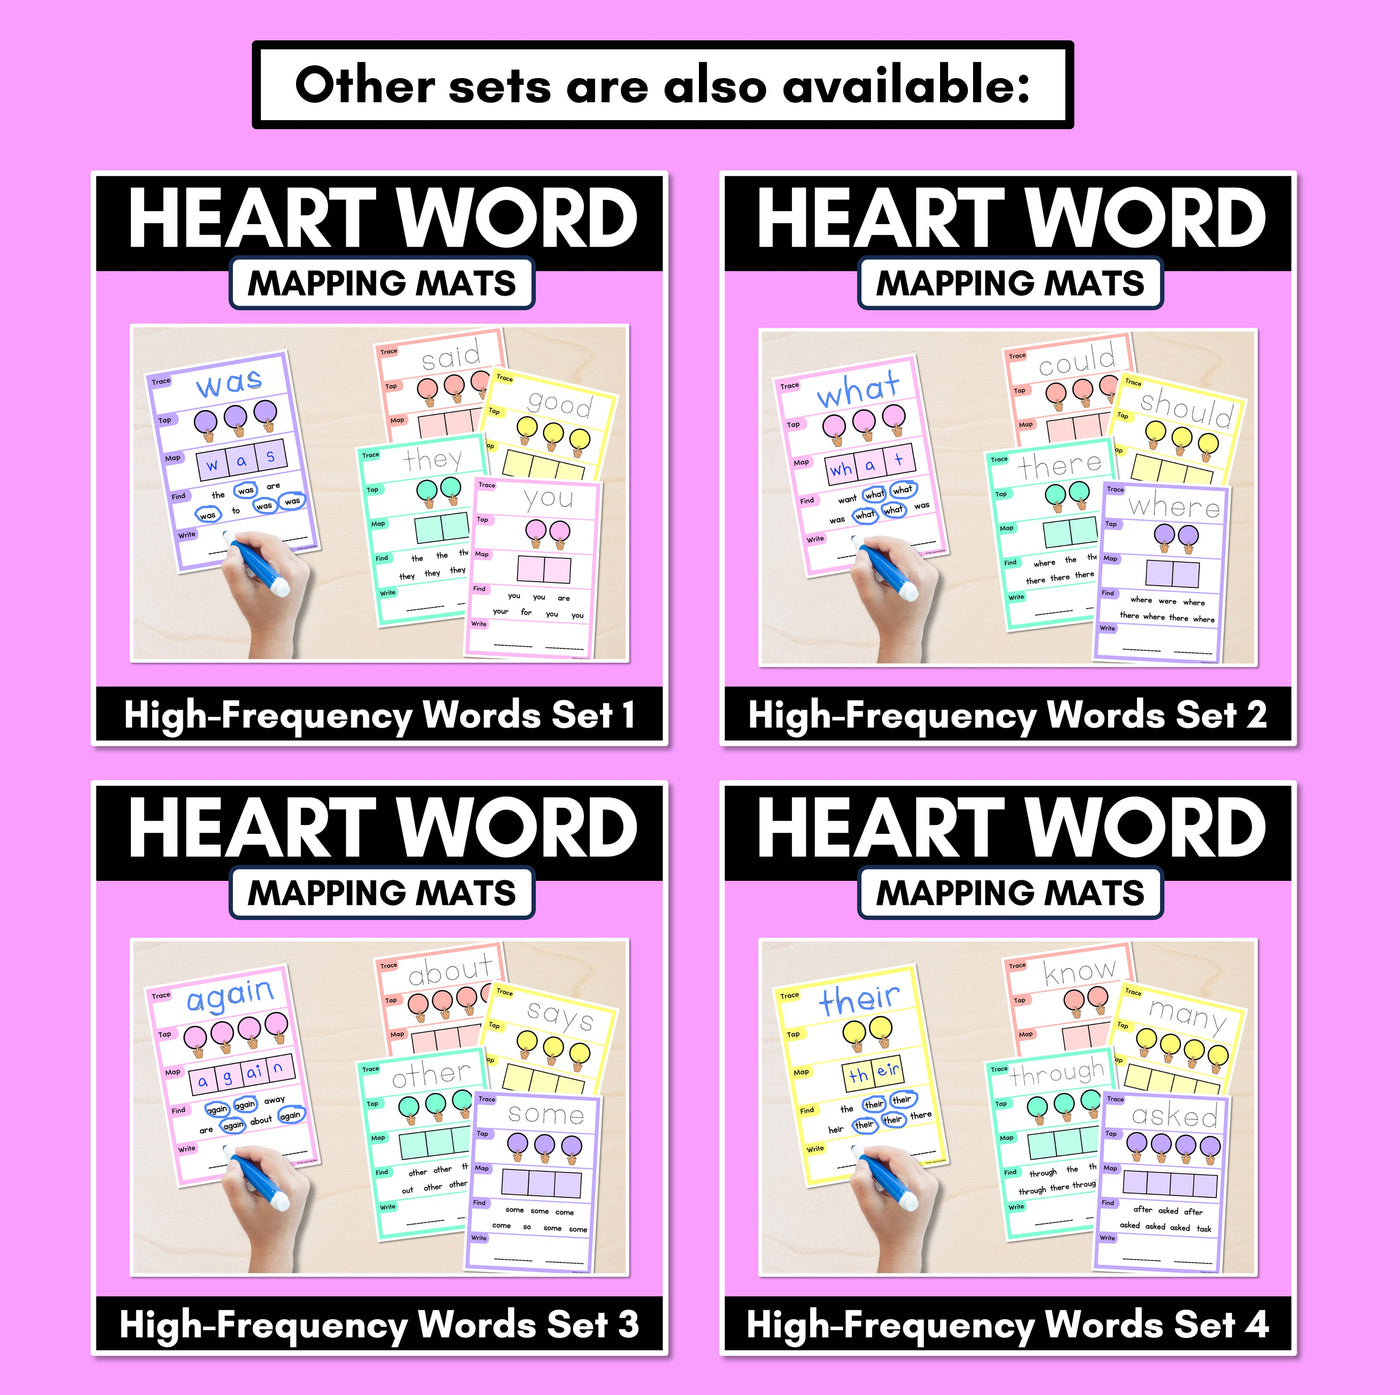 HEART WORD MAPPING MATS - High-Frequency Words Set 1